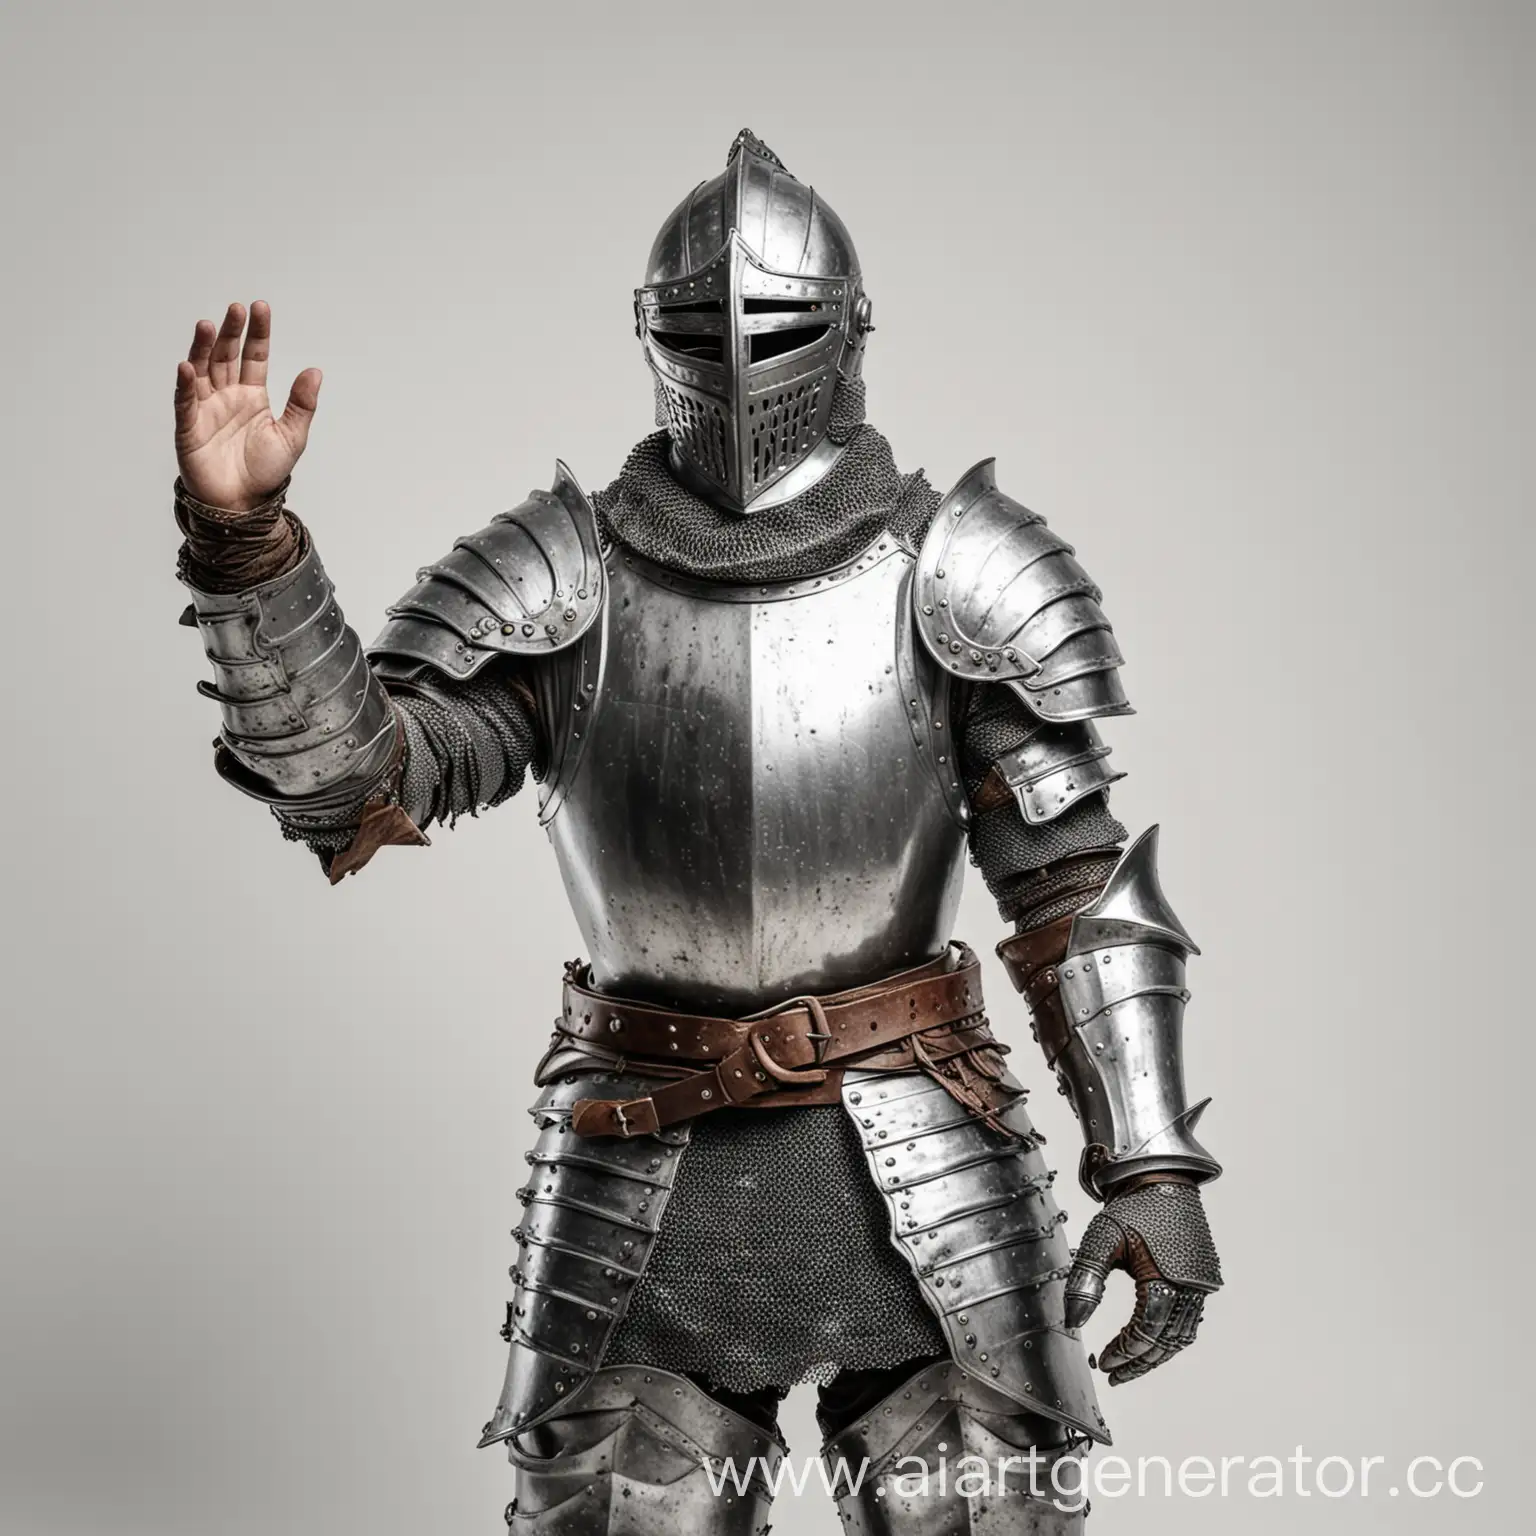 Armored-Knight-Waving-Hand-on-White-Background